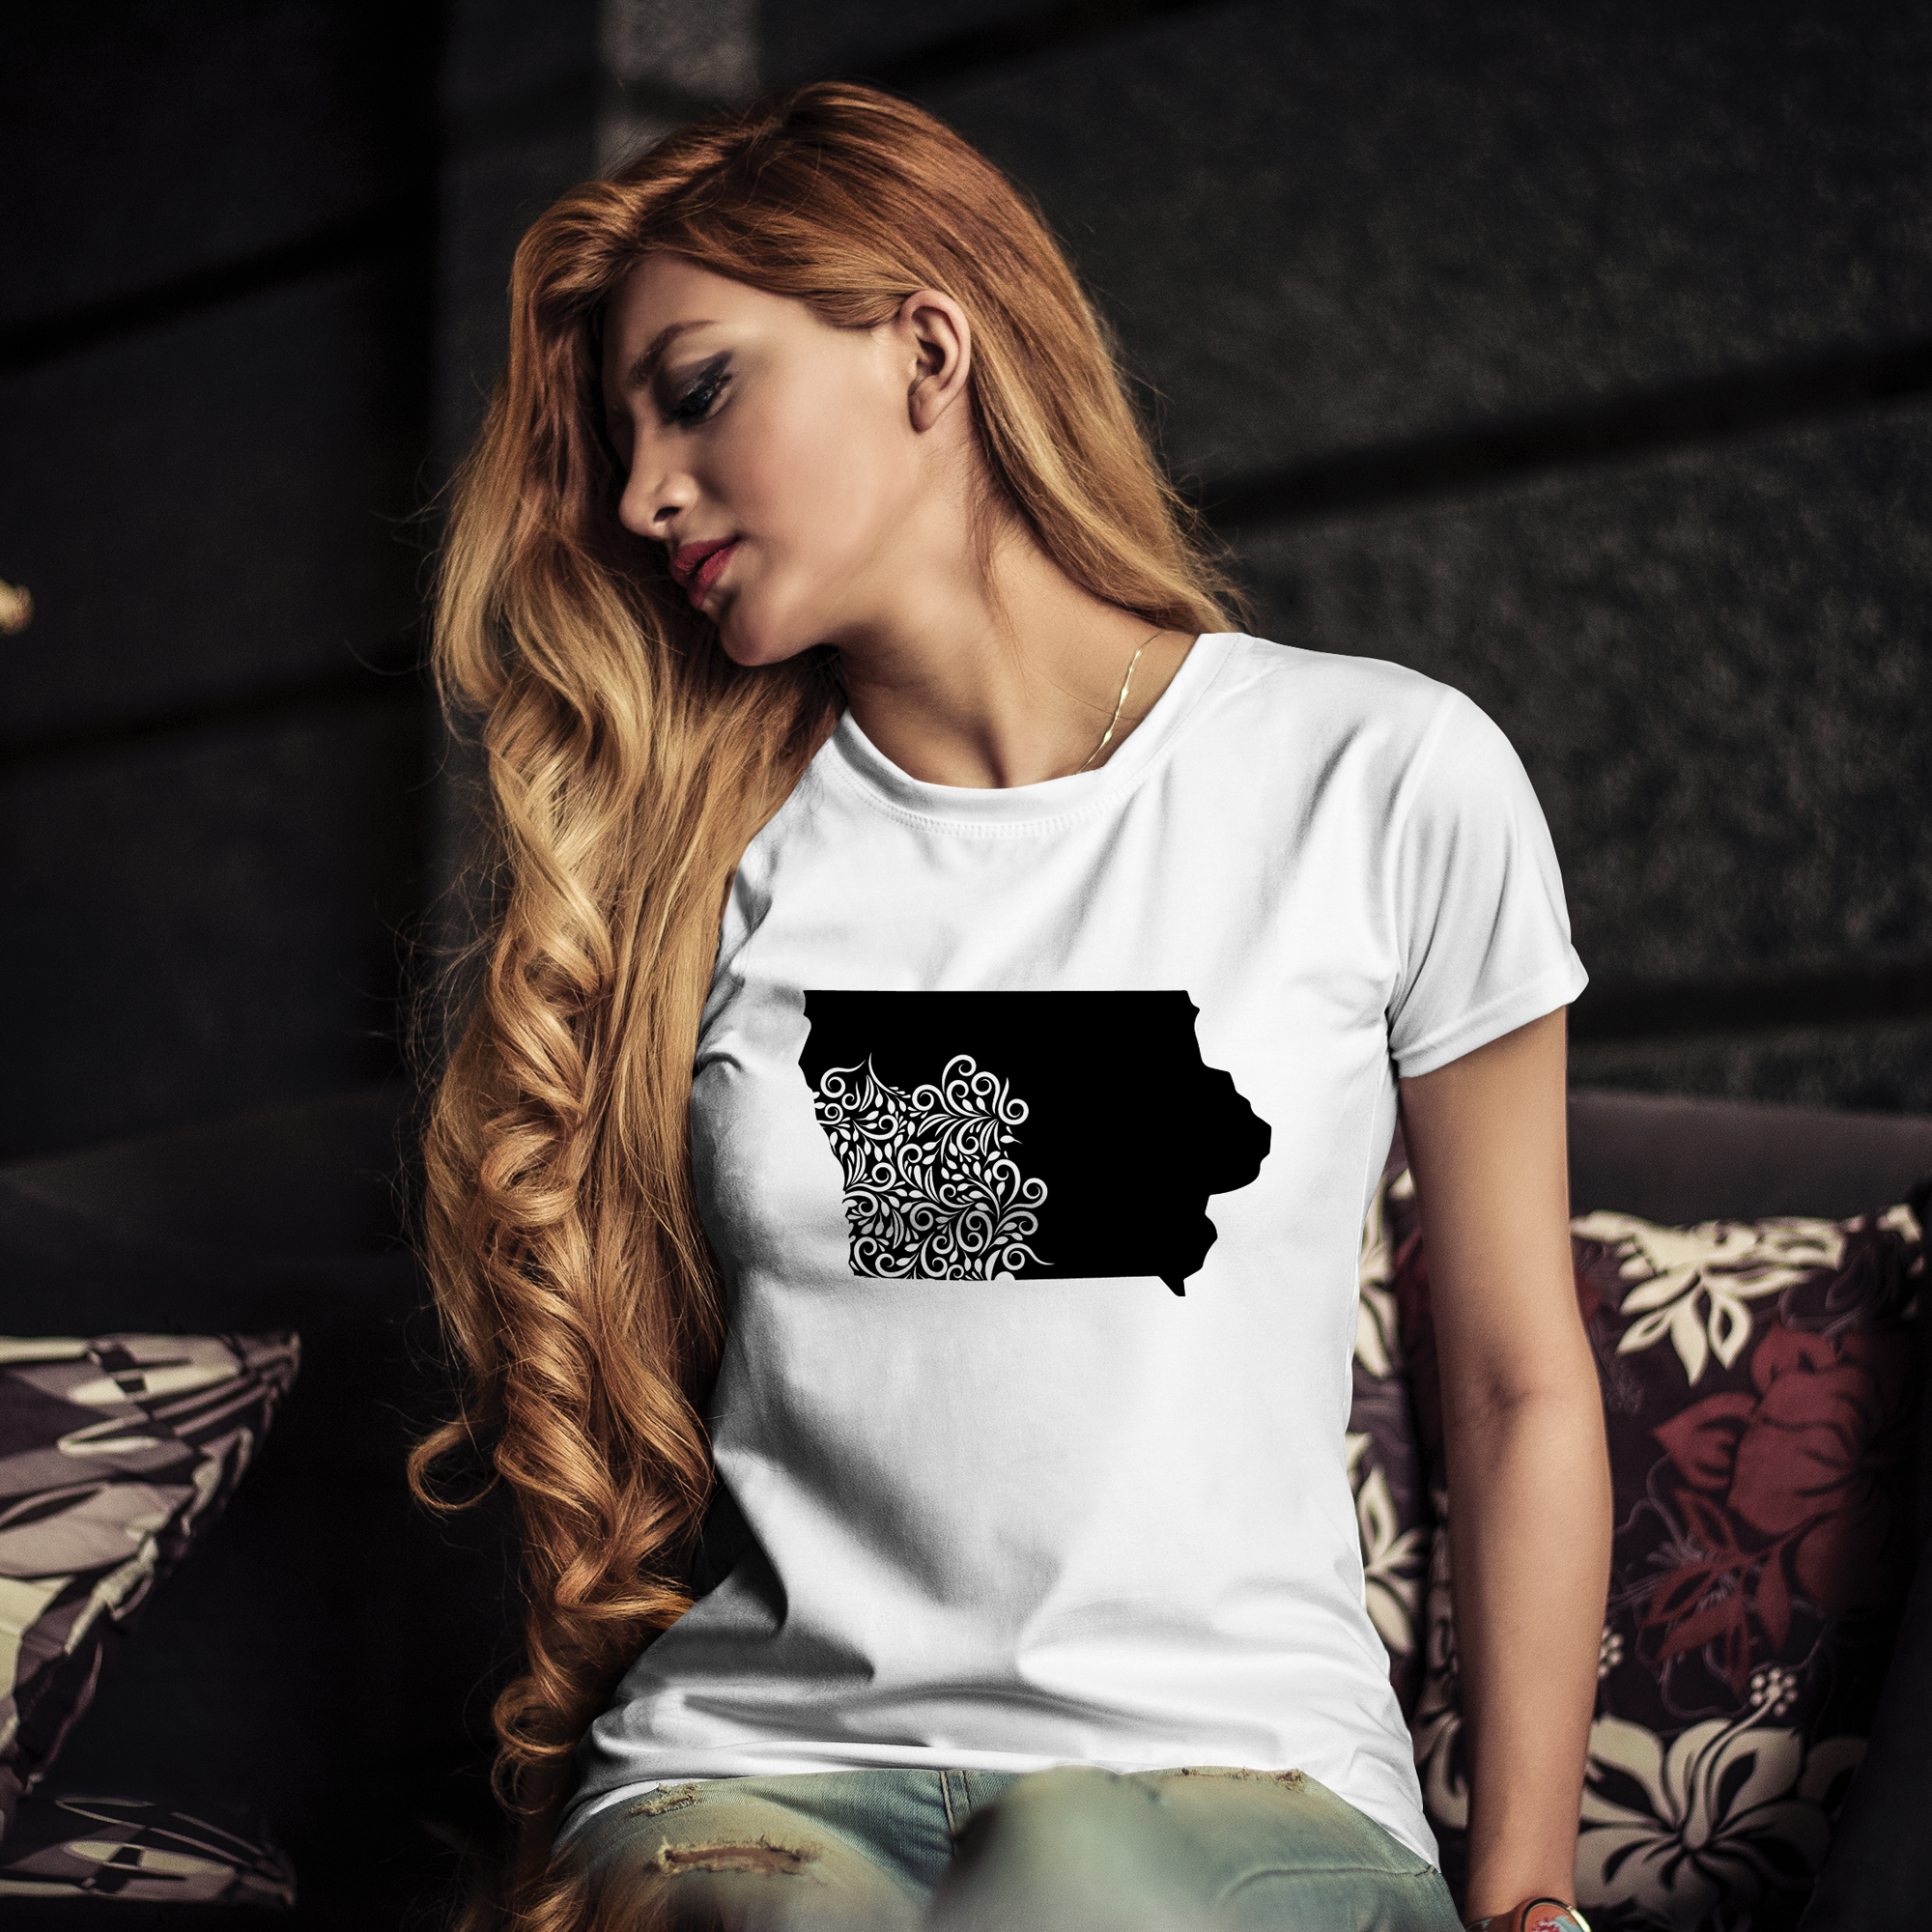 White t-shirt with black illustration of iowa state.